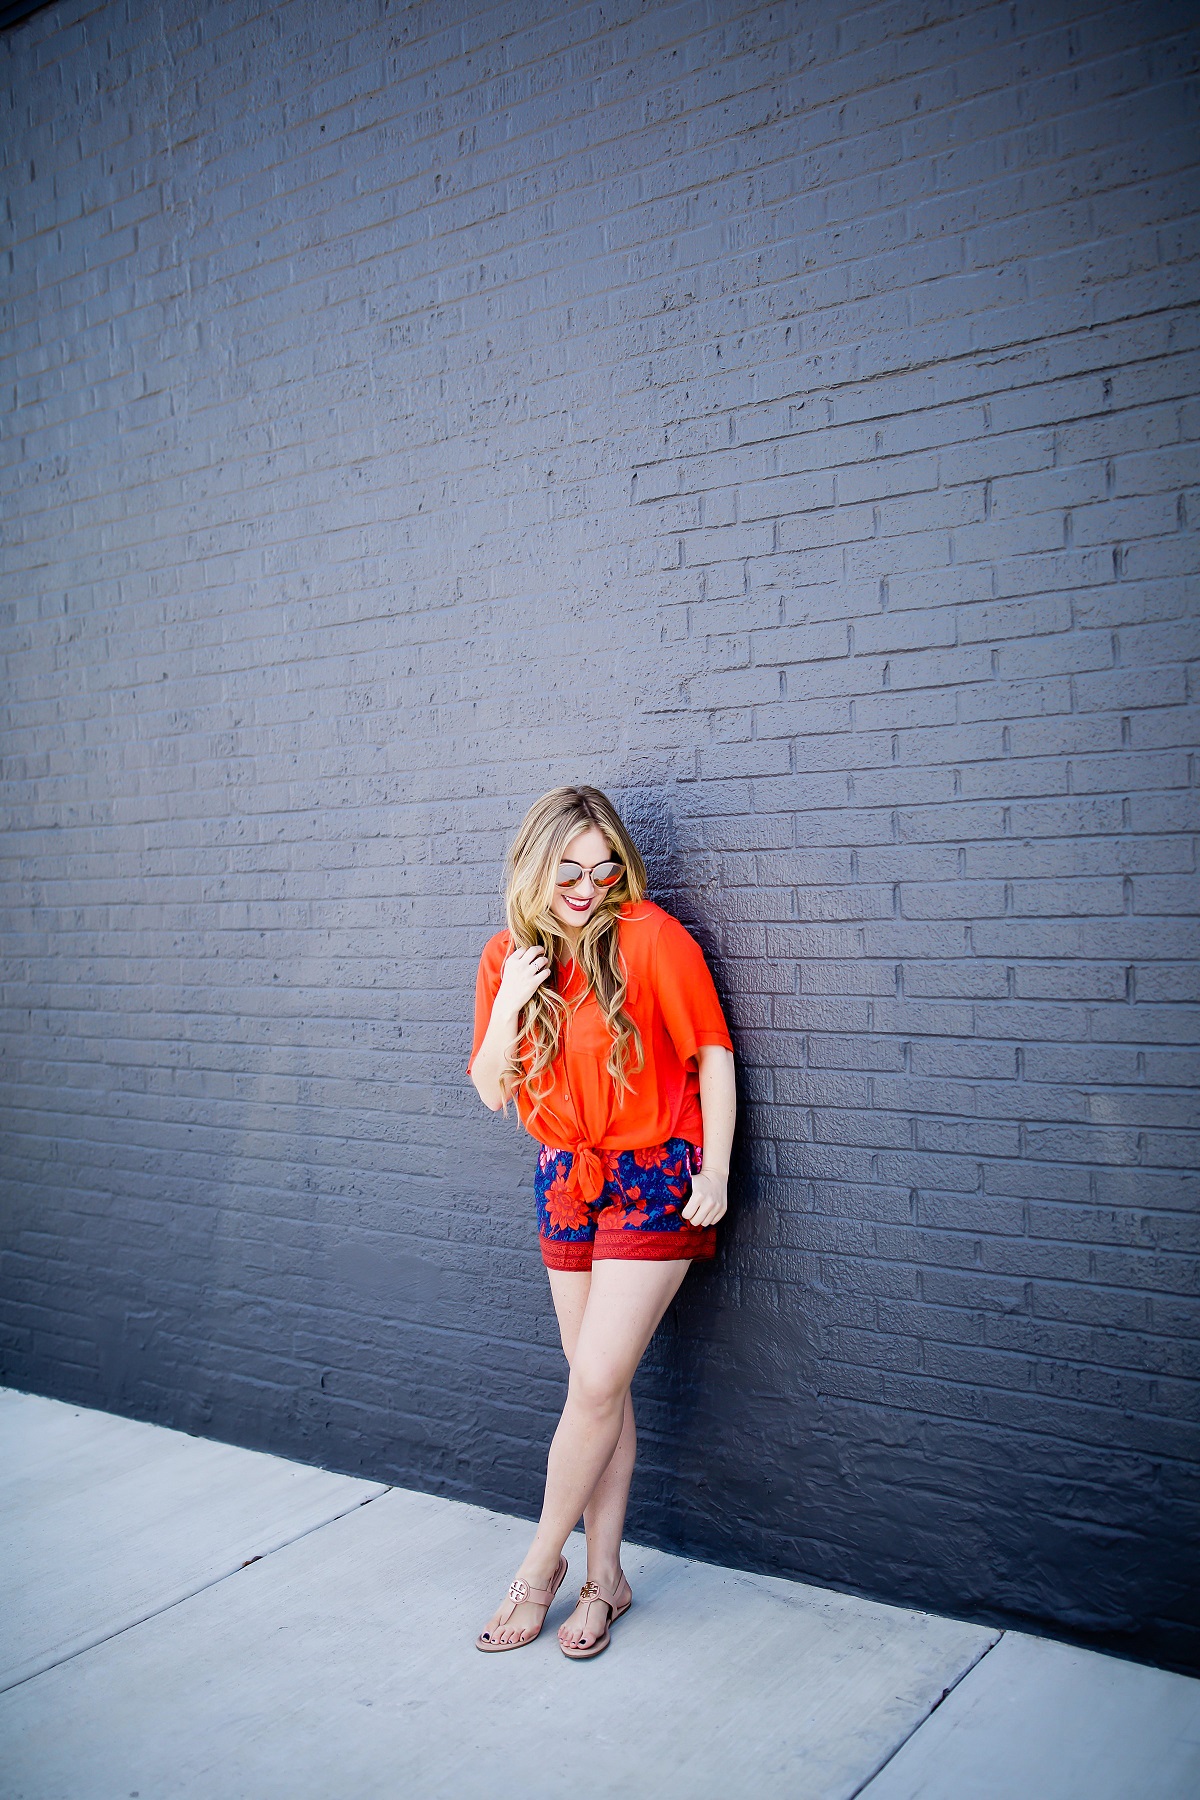 My Favorite Spring Shorts by popular East Memphis fashion blogger Walking in Memphis in High Heels